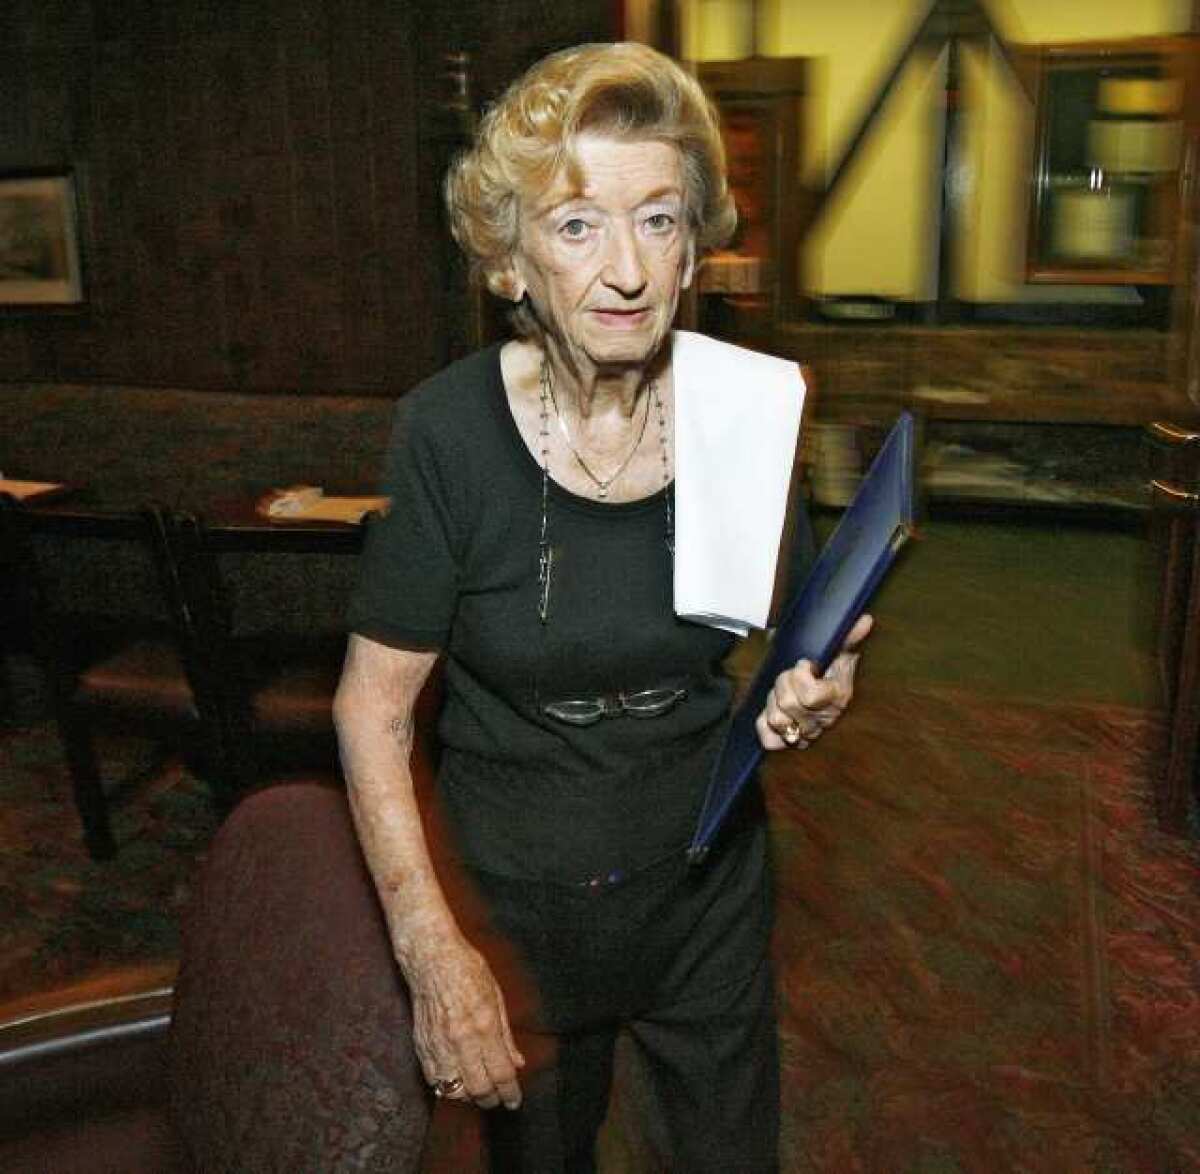 Antonia Becerra, 81, of Glendale, working at Taix in Los Angeles on Friday, September 28, 2012, where she has worked since 1968. Becerra fell victim to a Nigerian scam and lost $45,000, her life savings.